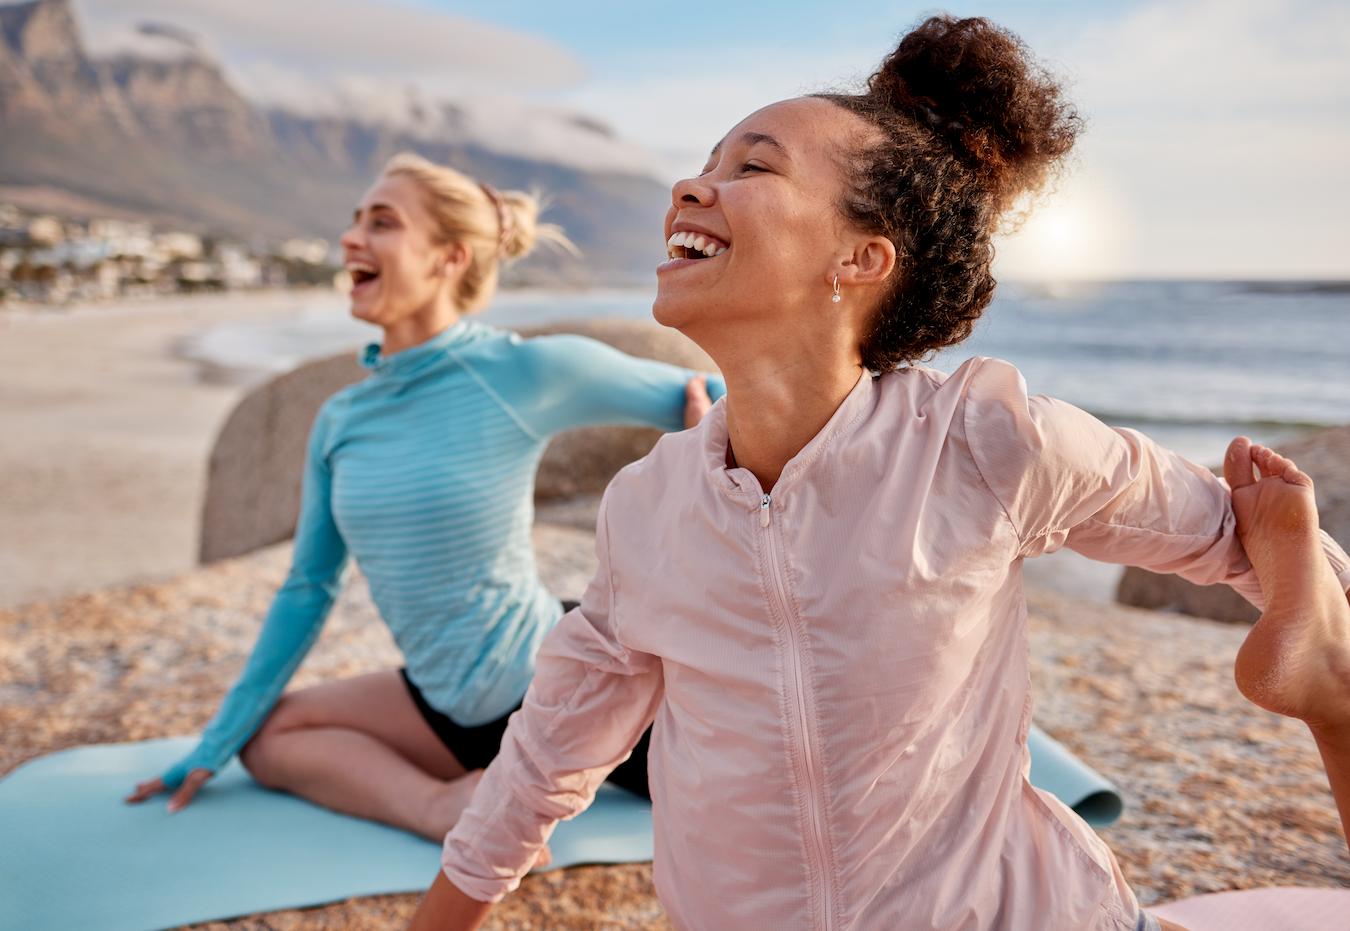 a couple of women doing yoga and laughing on the beach human behavior mental health professionals clinical psychology holistic health person's past therapy person as a whole physical health relationships behaviors treatment therapy relationships therapy physical health relationships relationships